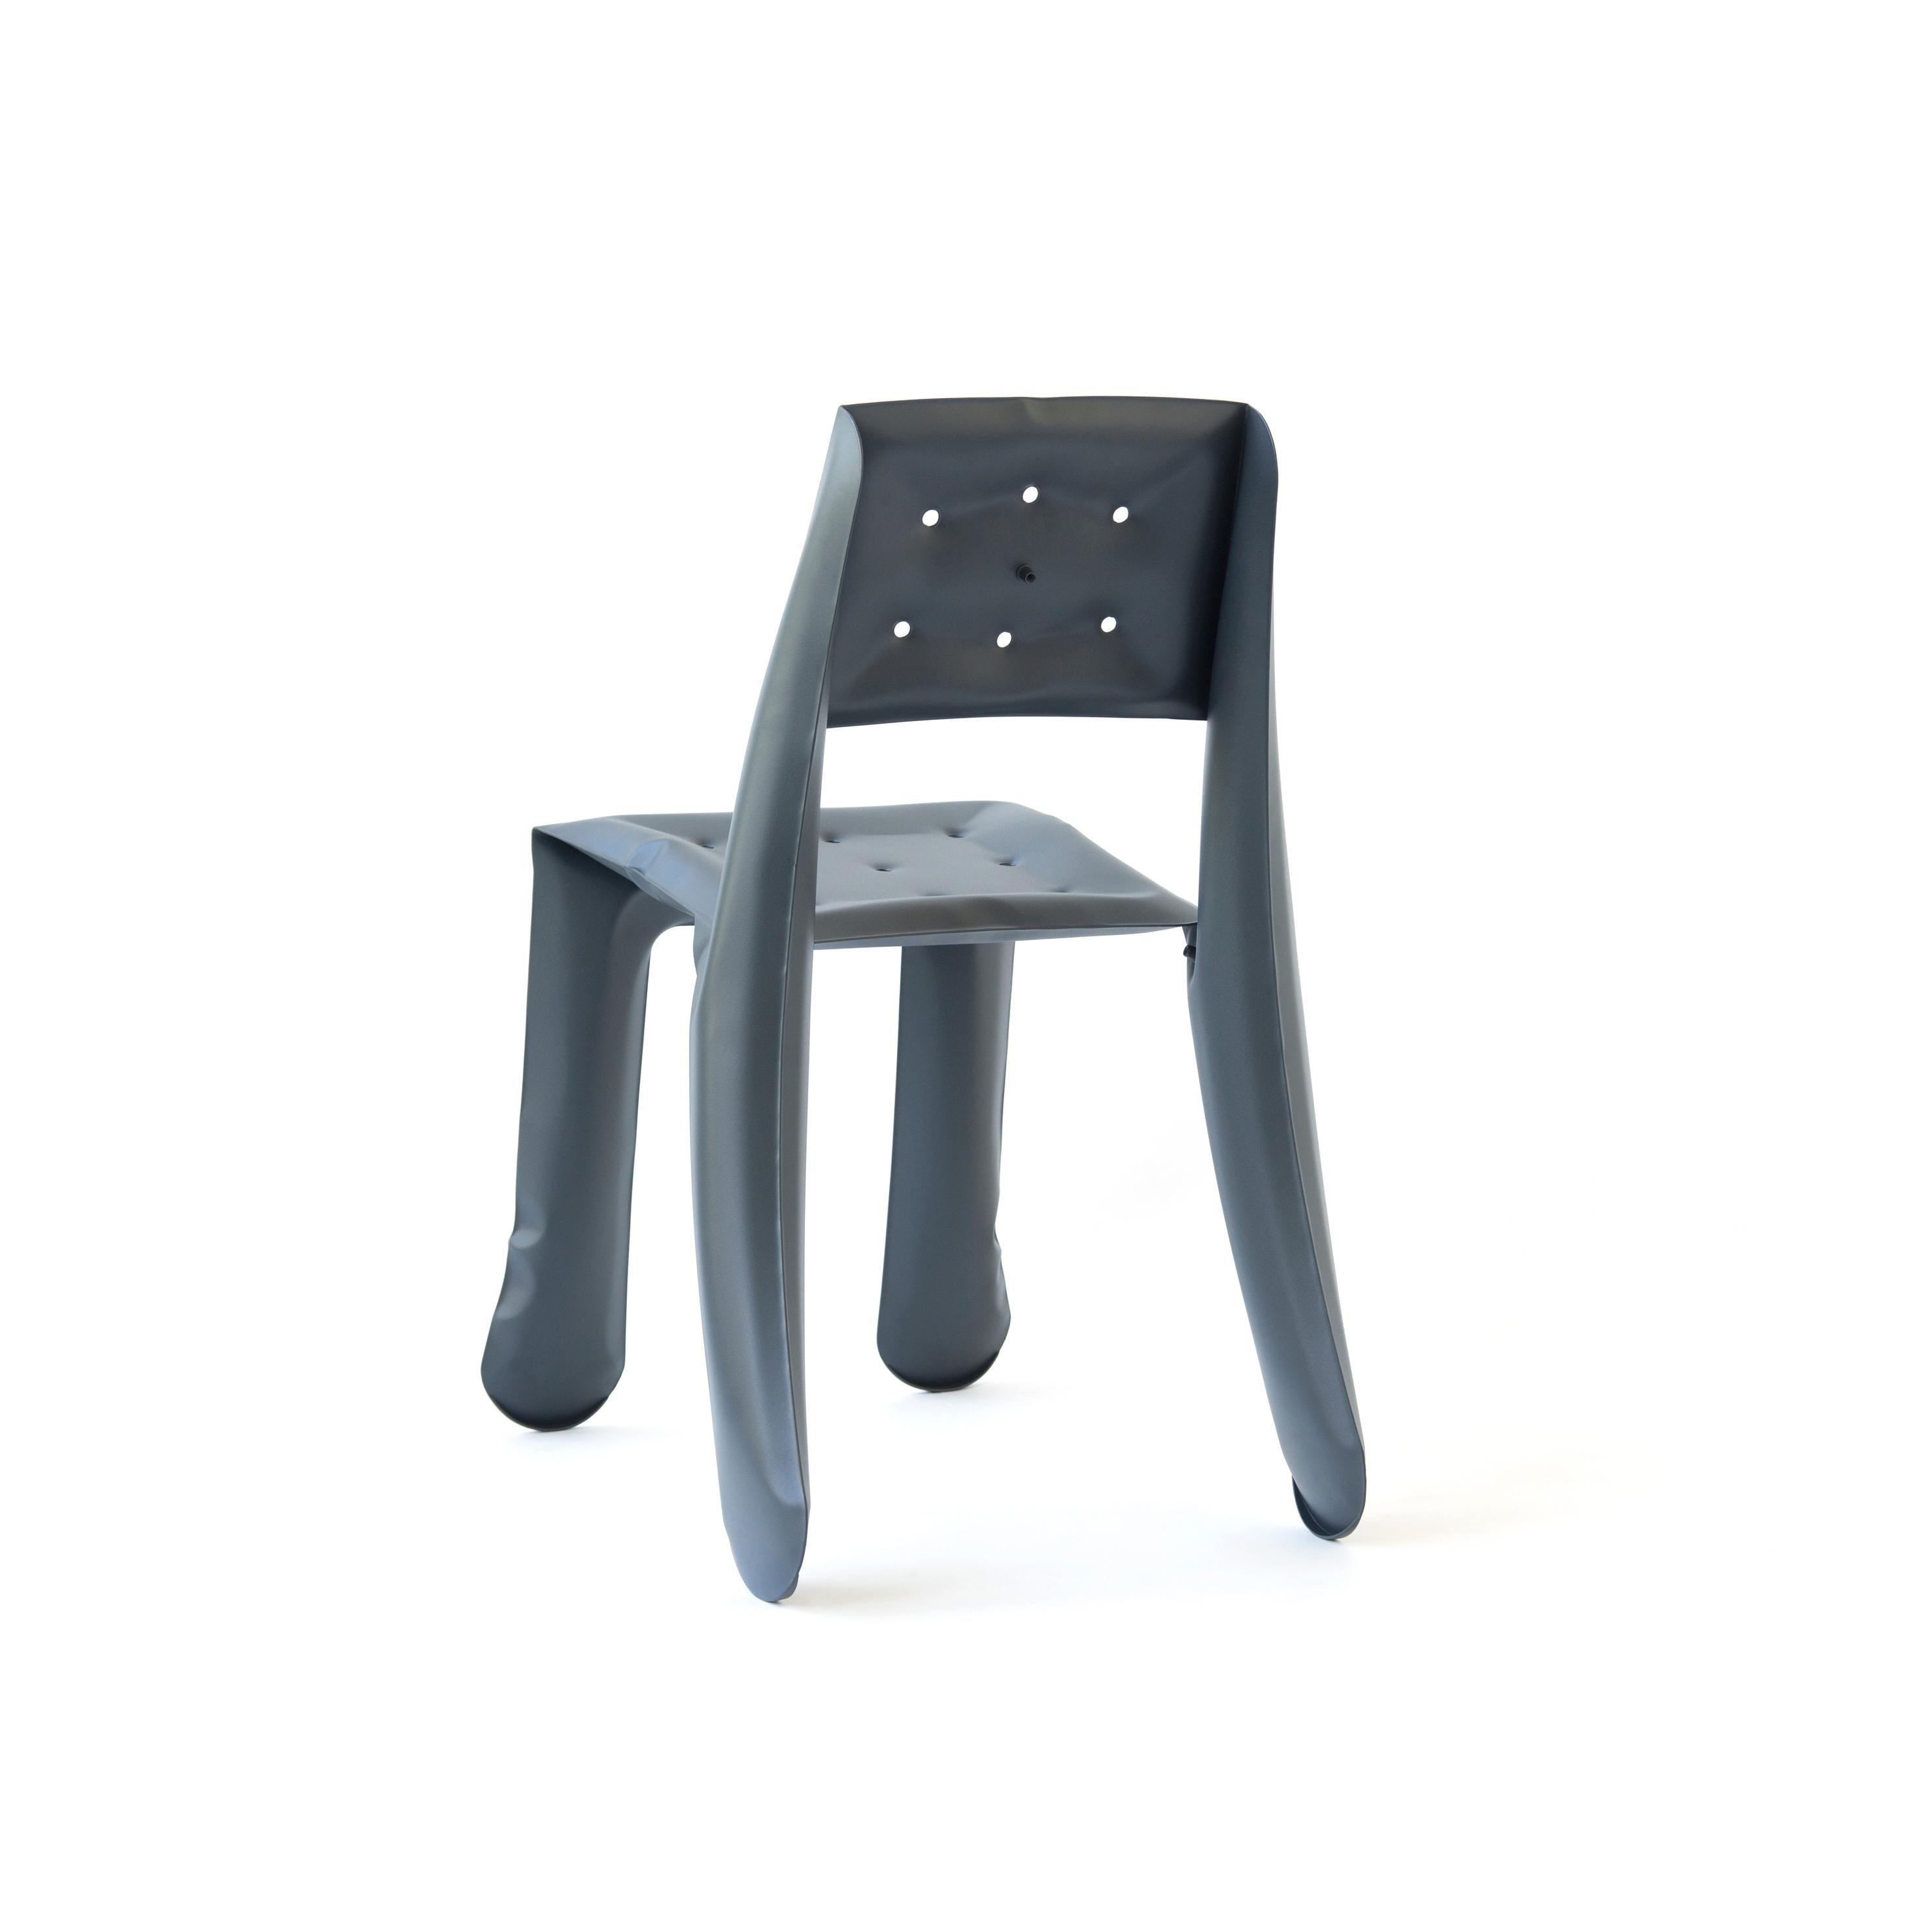 Graphite Aluminum Chippensteel 0.5 Sculptural Chair by Zieta In New Condition For Sale In Geneve, CH